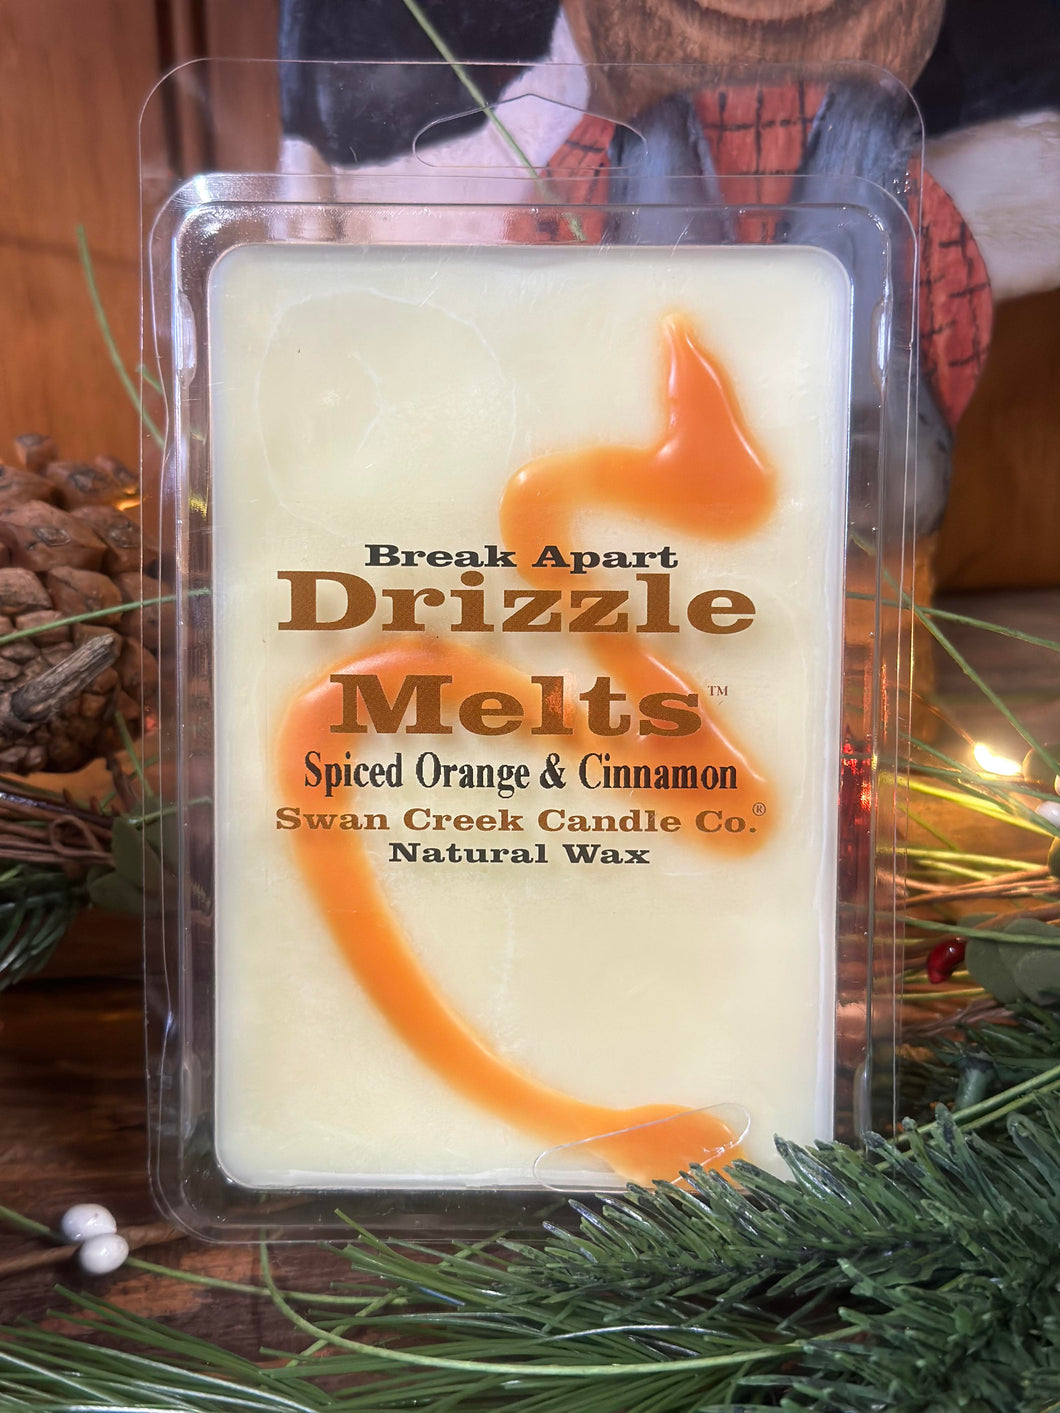 Swan Creek Candle Co. Spiced Orange and Cinnamon Drizzle Melts